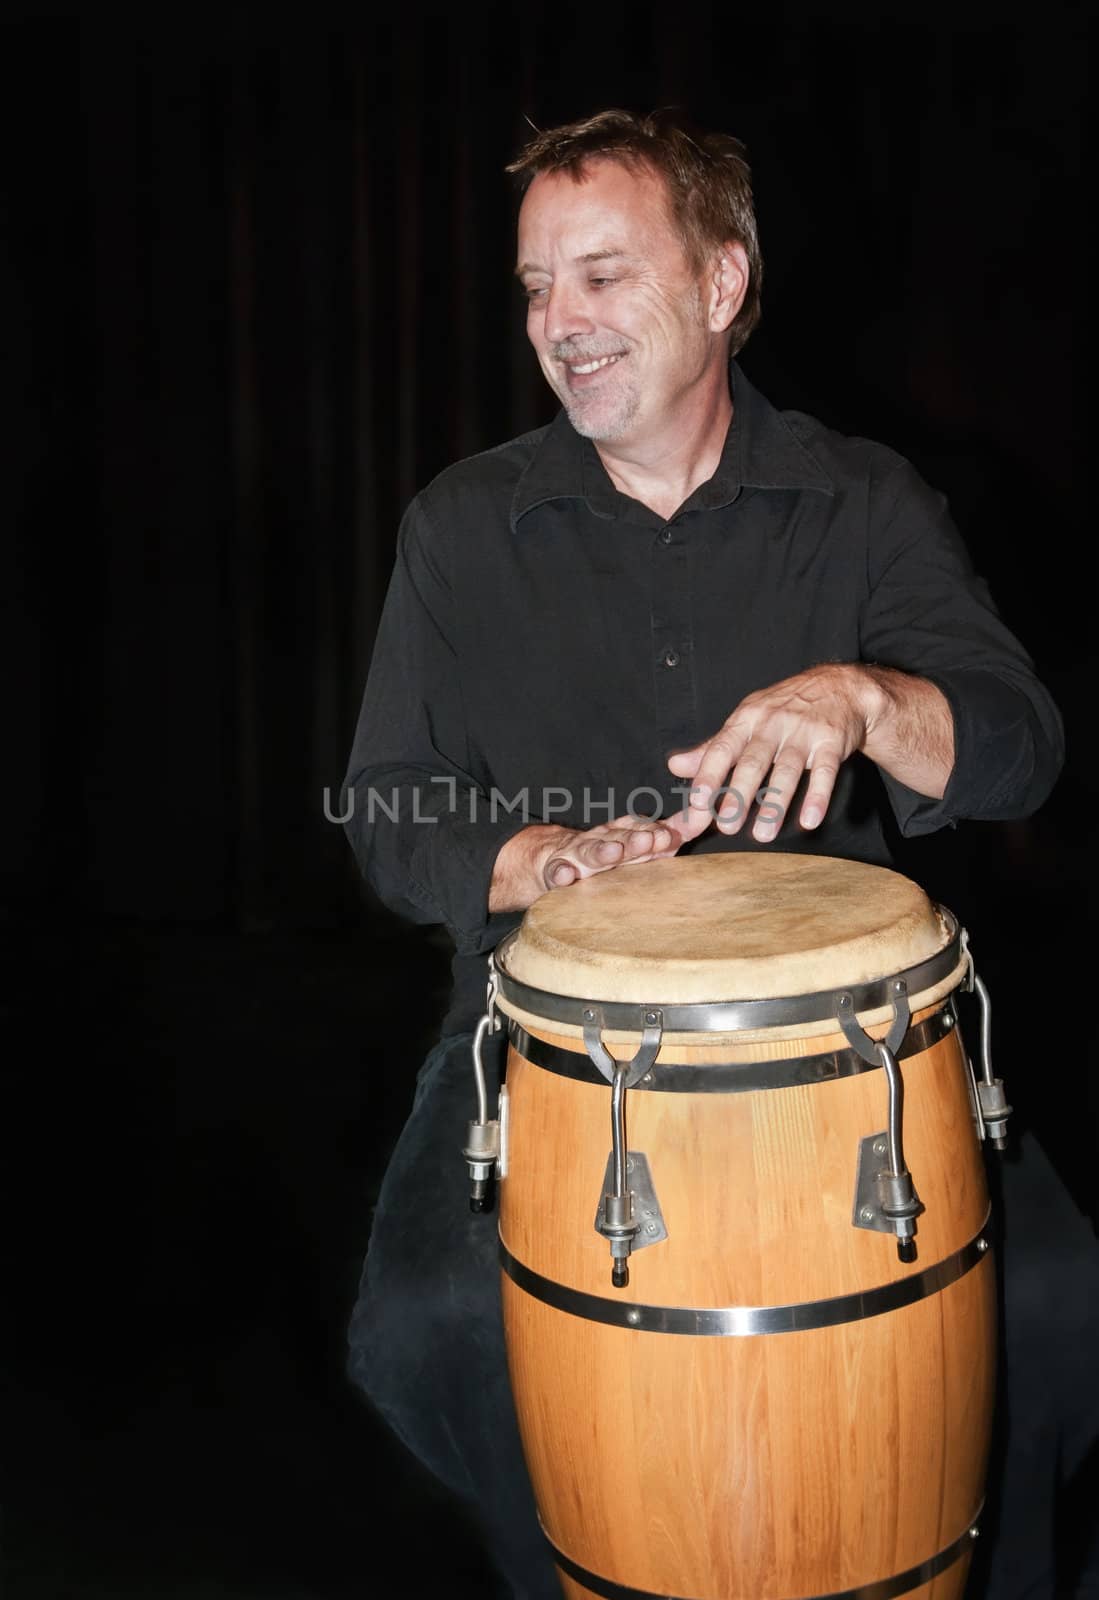 Percussionist René Fortier playing the National Art Centre in Ottawa, Canada.